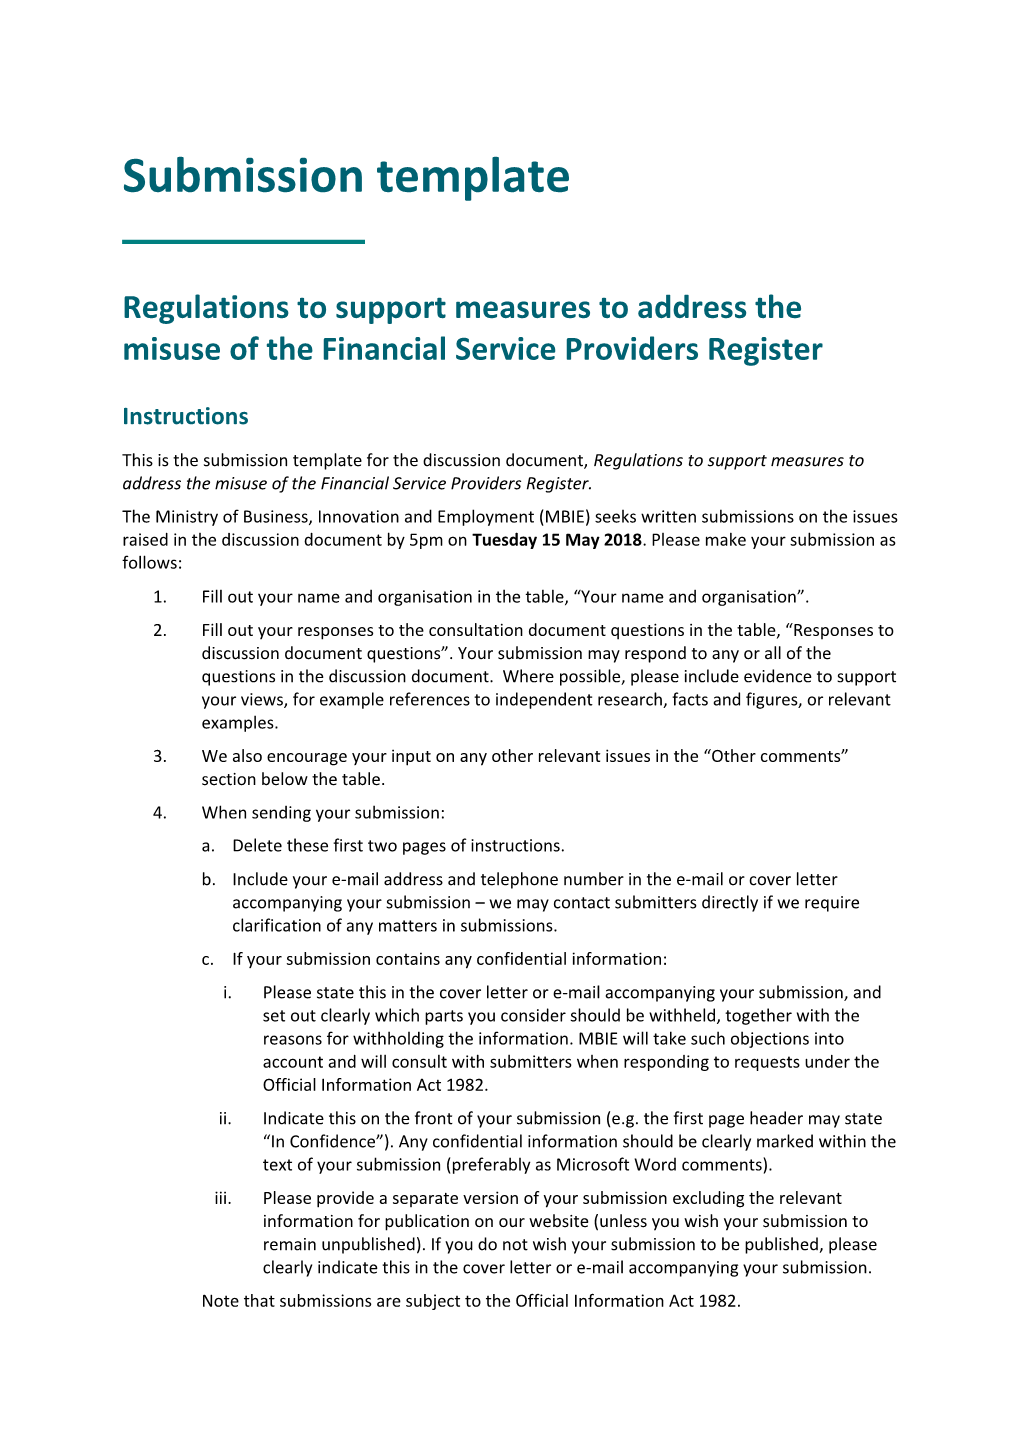 Regulations to Support Measures to Address the Misuse of the Financial Service Providers